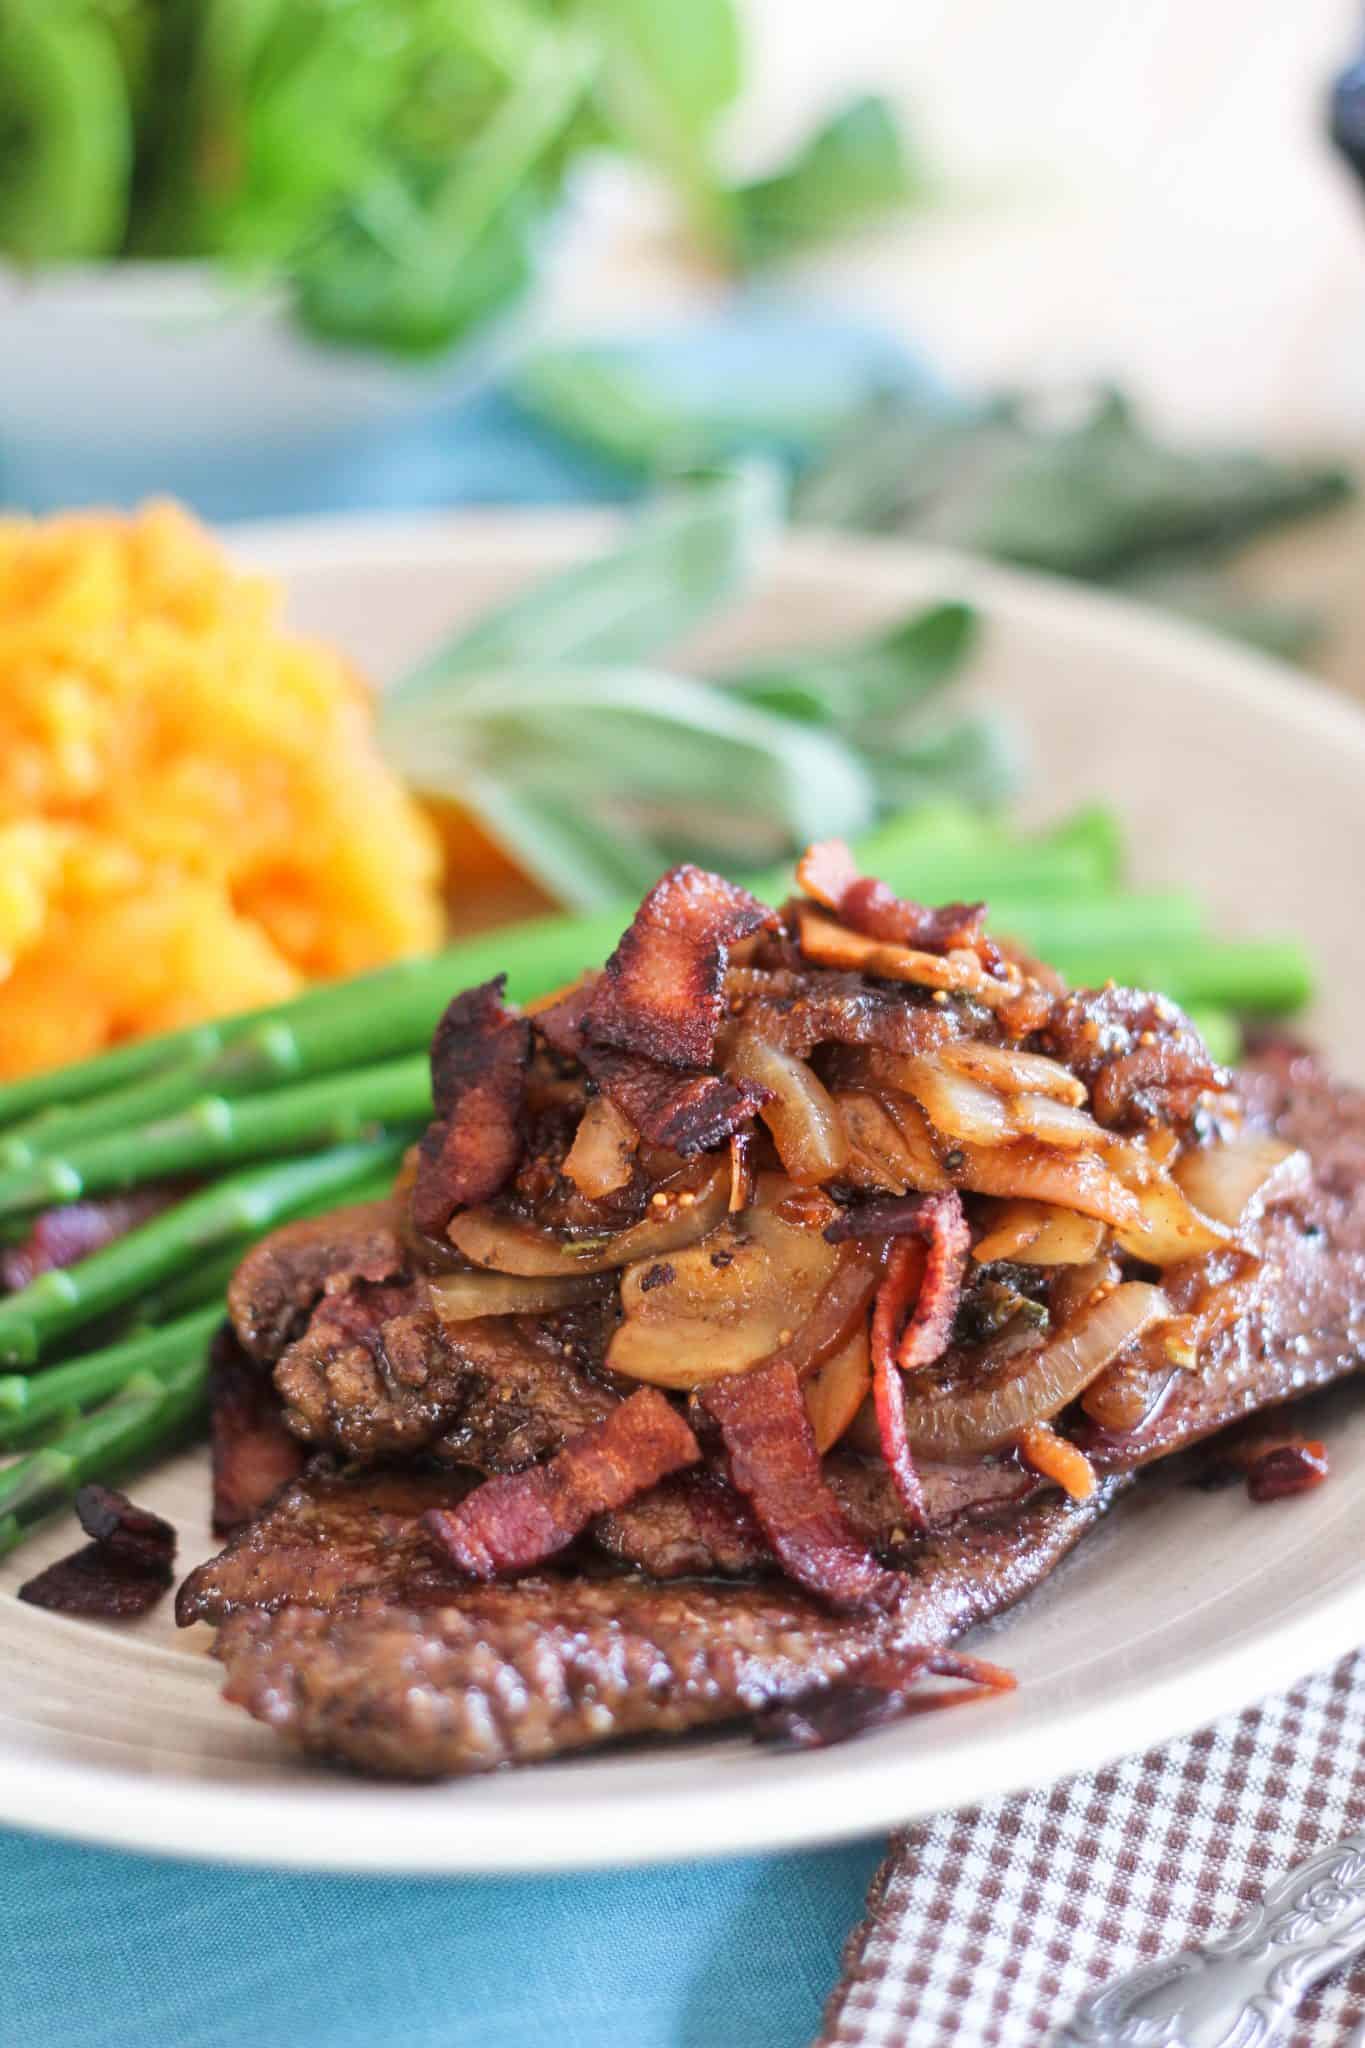 Beef Liver with Figs and Caramelized Onion | by Sonia! The Healthy Foodie